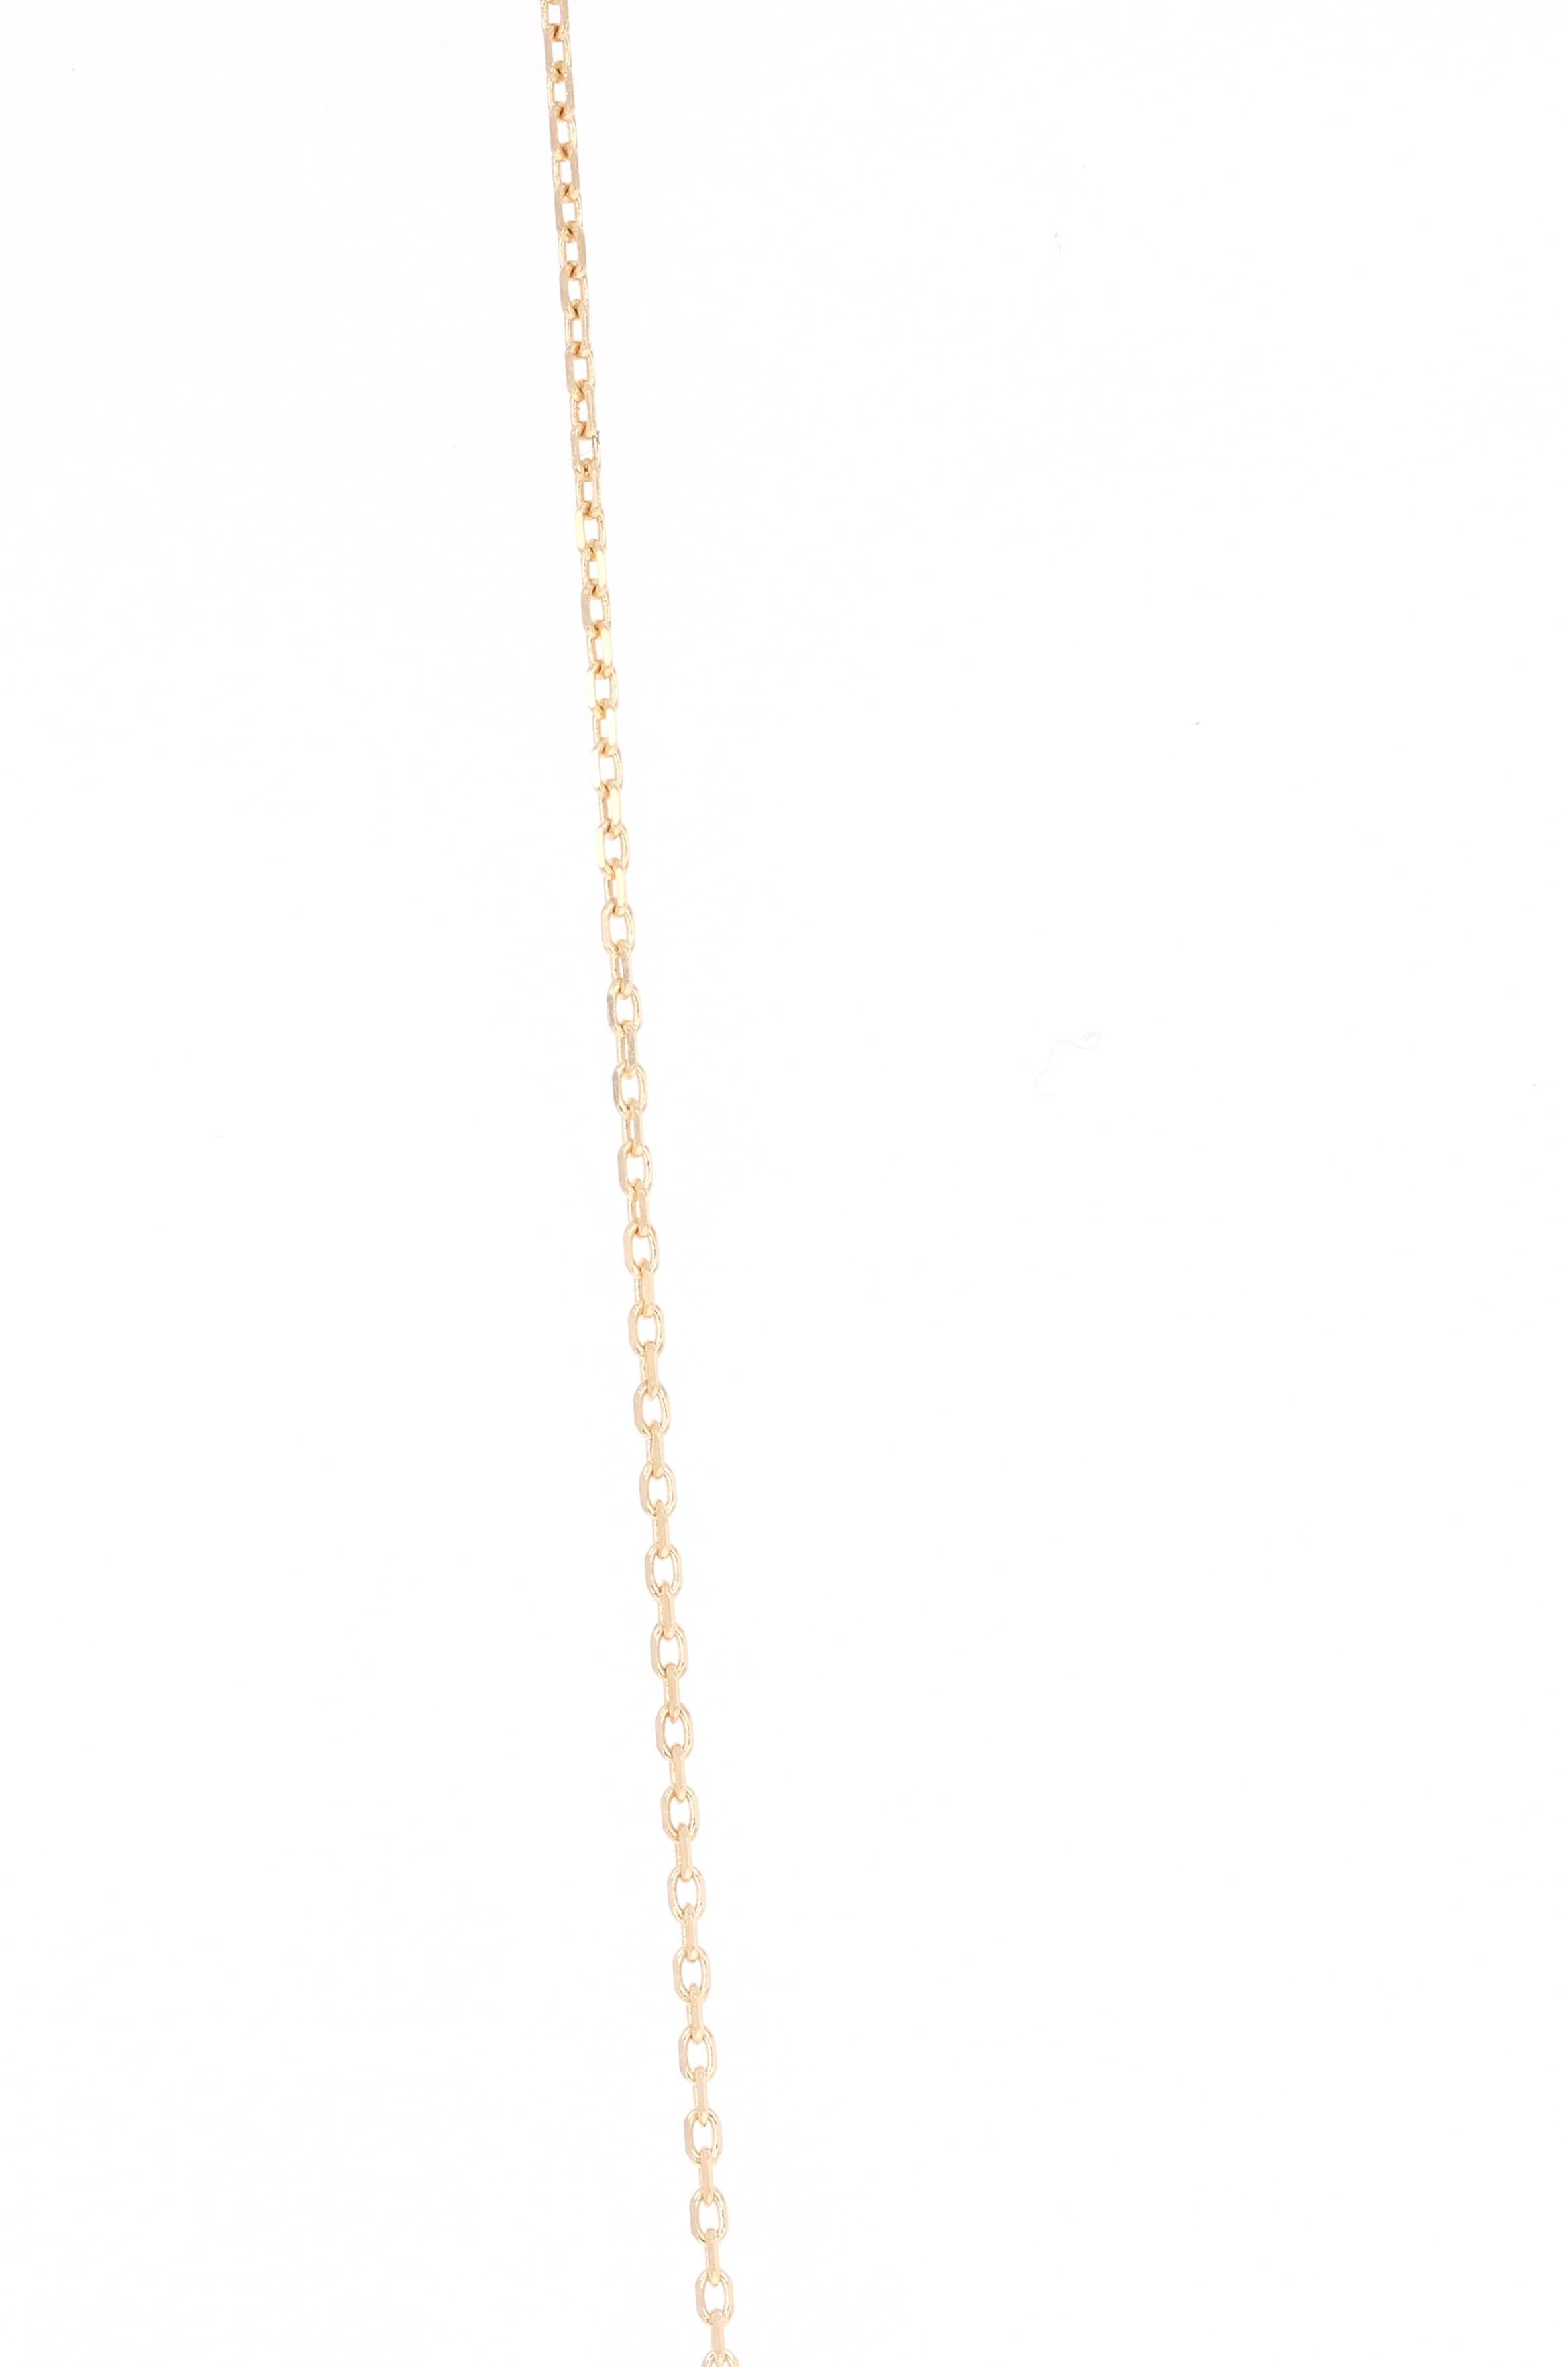 Contemporary 2.09 Carat Diamond Yellow Gold Chain Necklace For Sale